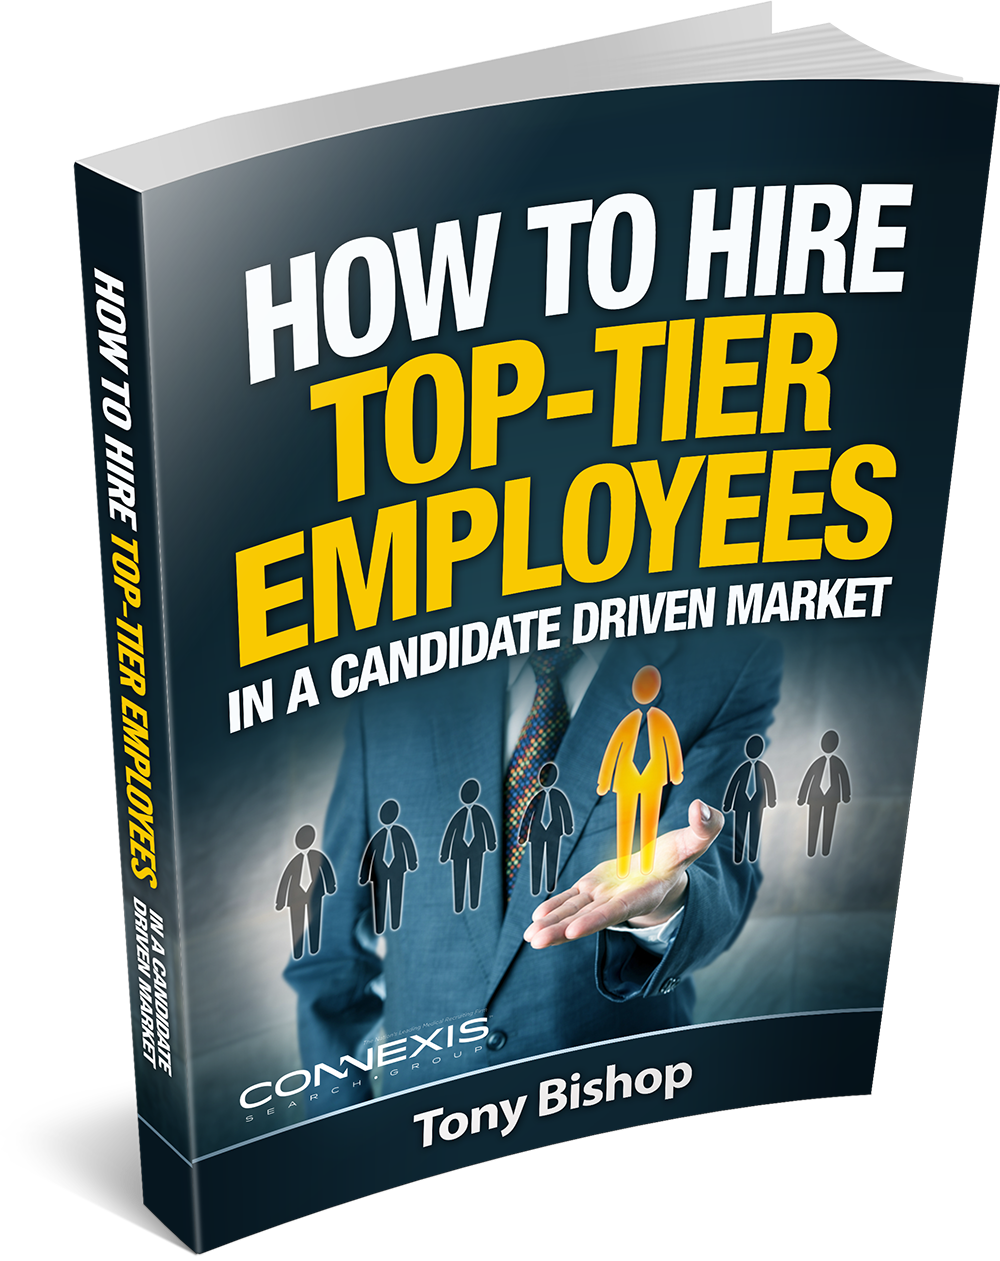 How To Hire Top-Tier Employees